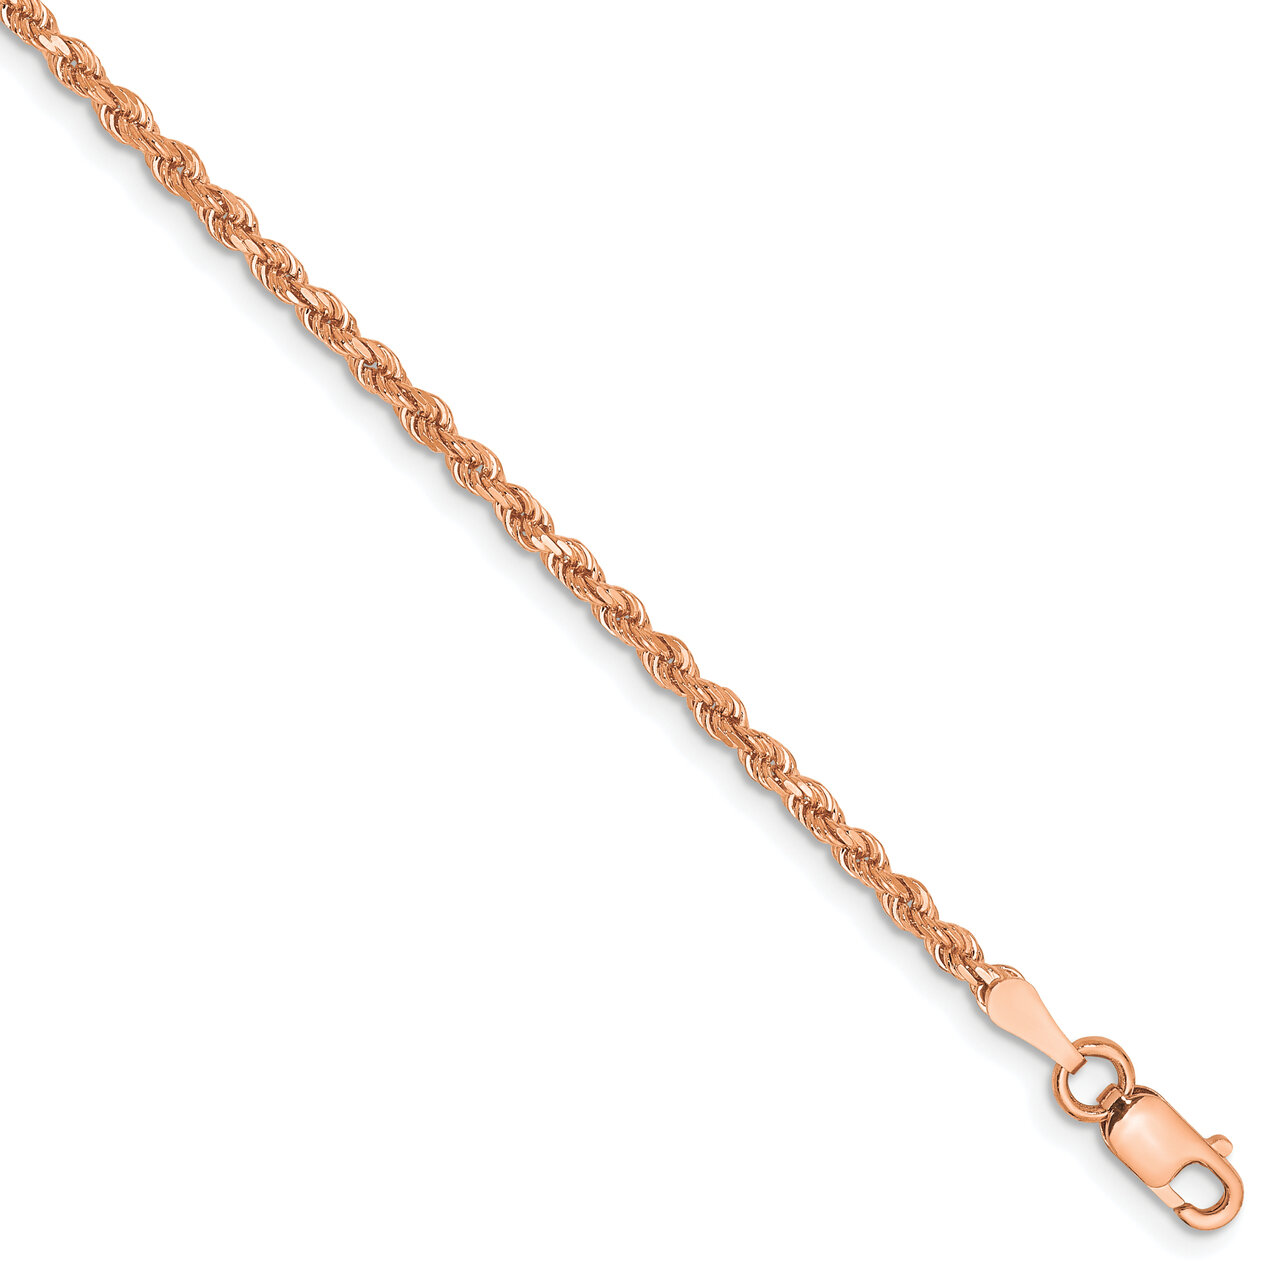 8 Inch 2mm Diamond-cut Rope with Lobster Clasp Chain 14k Rose Gold 016R-8